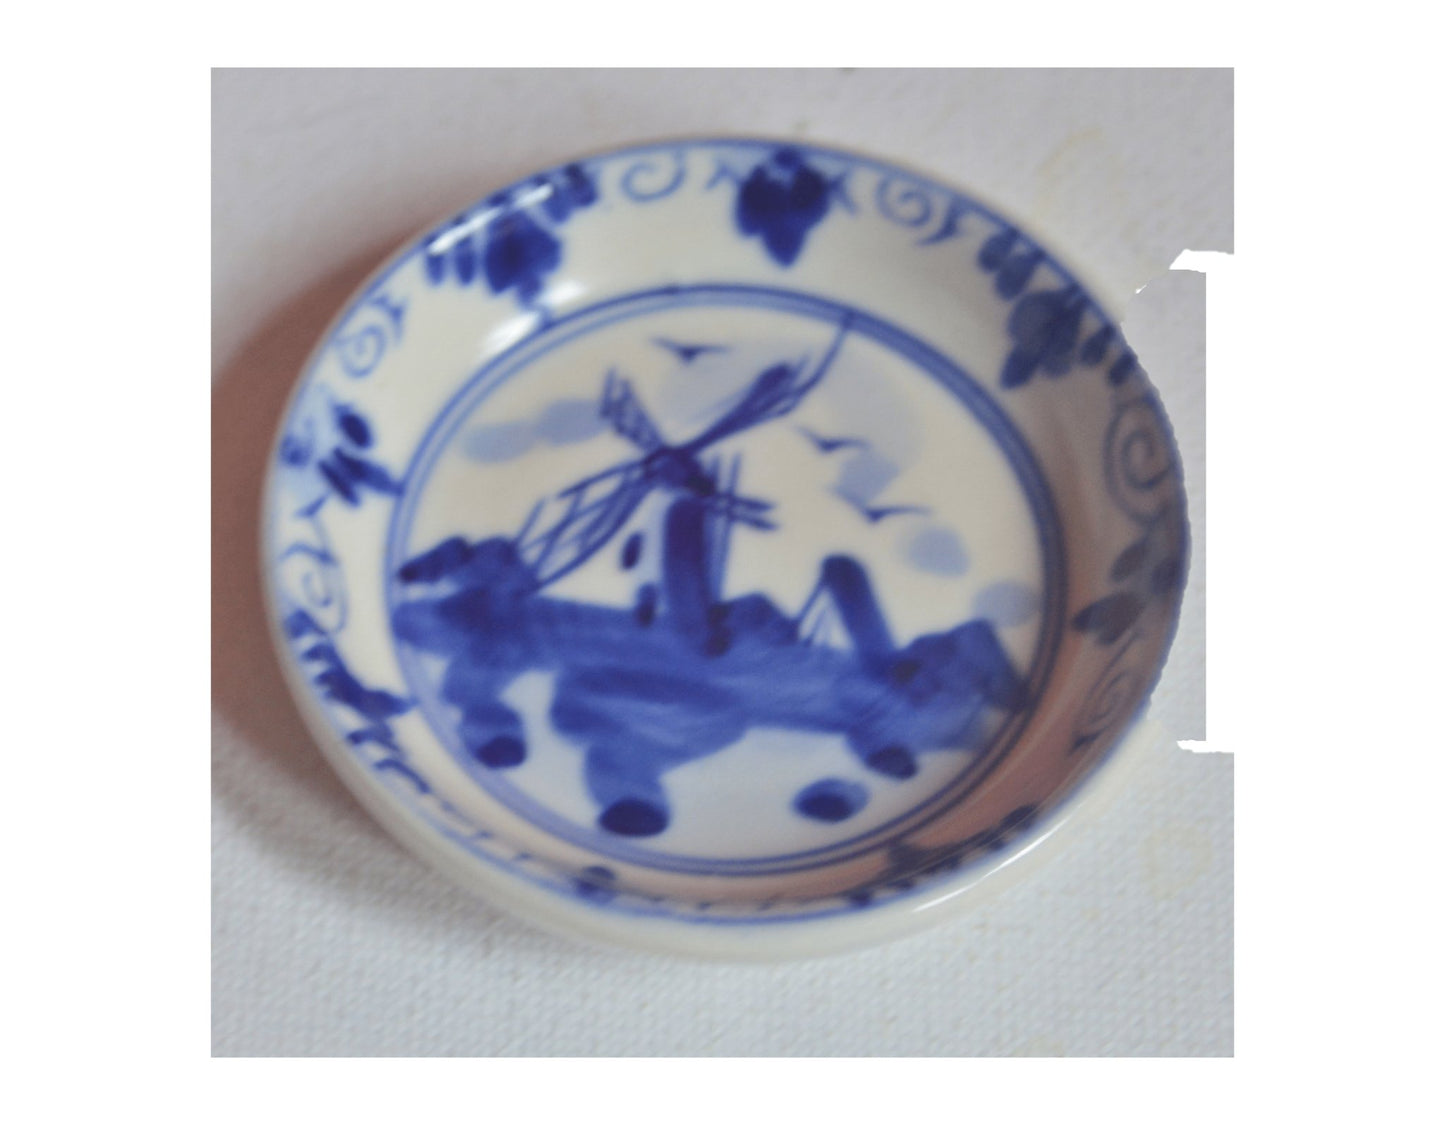 “MINIATURE DELFT PLATE DEPICTING A WINDMILL GOOD CONDITION” - TMD167207